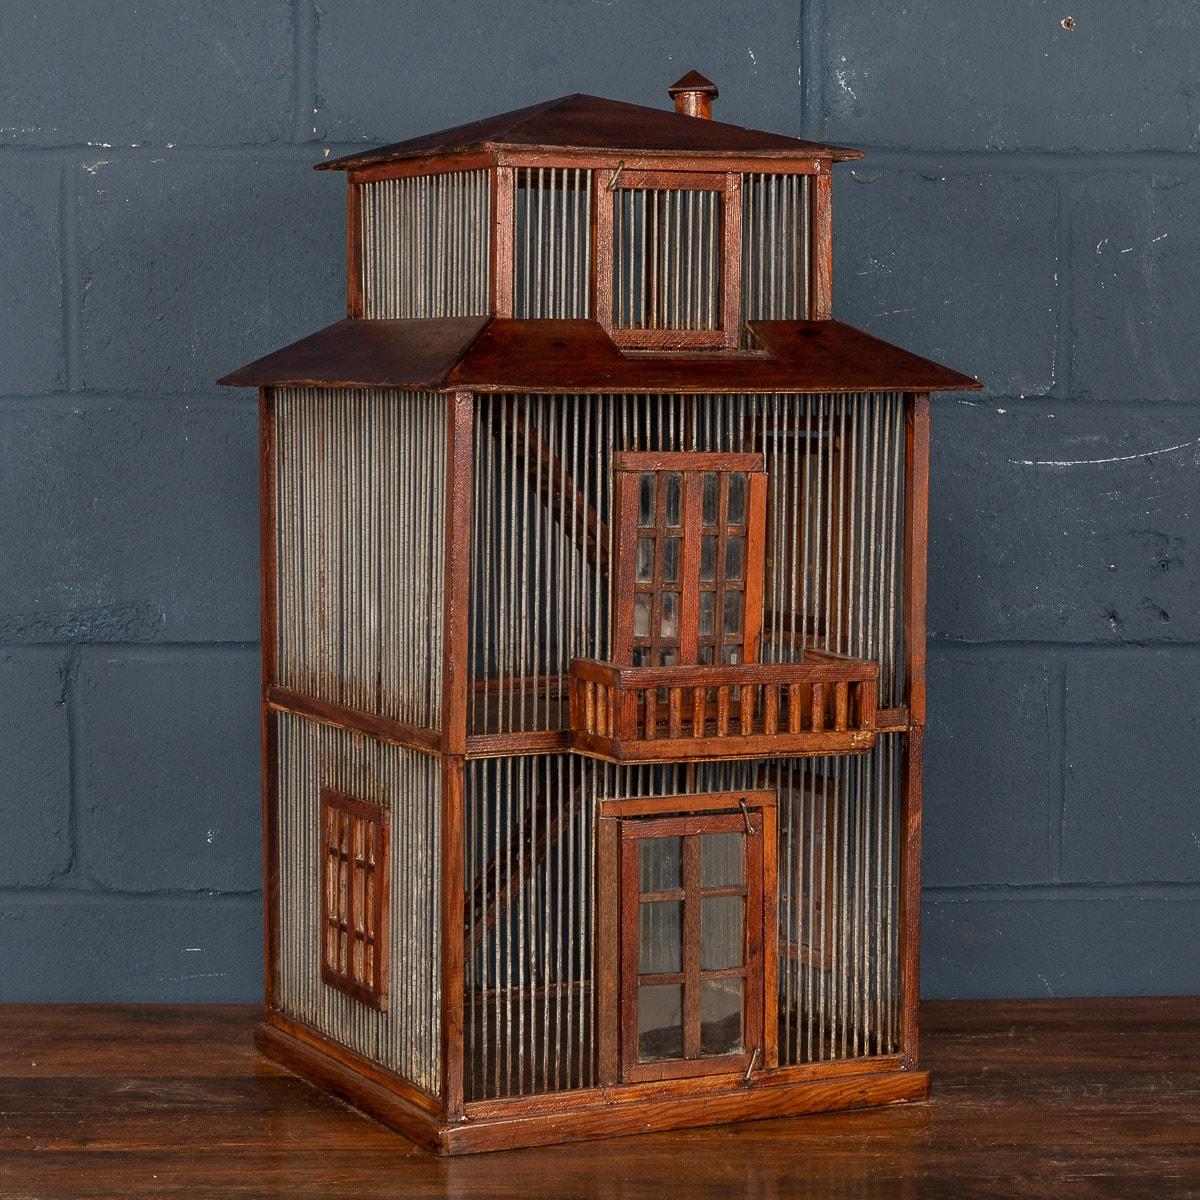 A rare and unusual hamster cage, hand made in Italy in the first half of the 20th Century. The hamster cage is entirely realised out of softwood (probably pine) and is scratch made insofar as no component is pre-made or manufactured. The cage has